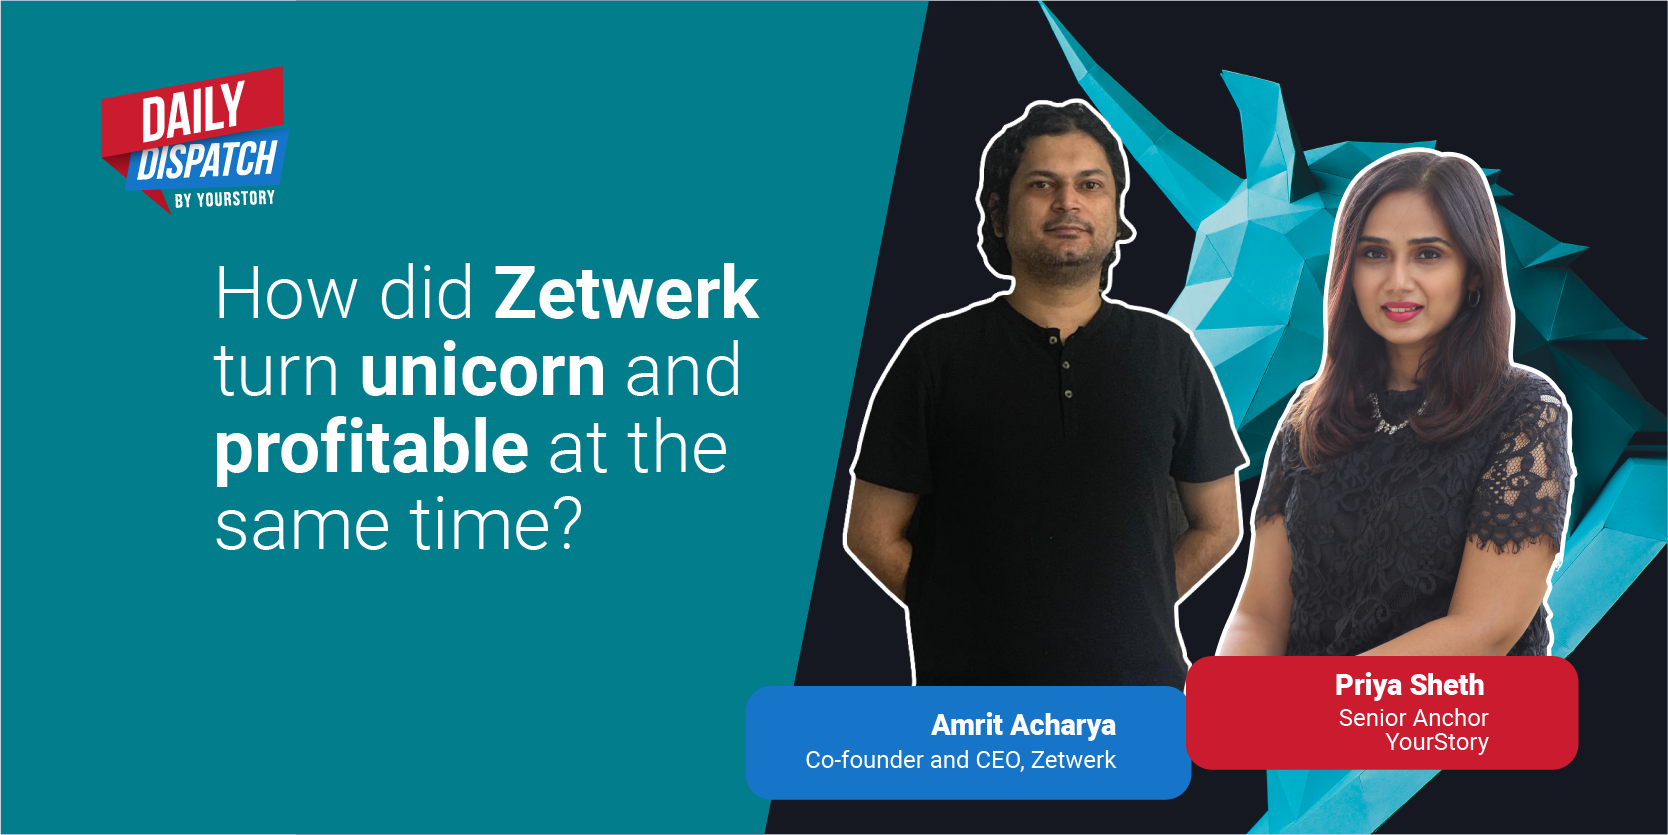 Zetwerk CEO tells how the company will balance being a unicorn while turning profitable